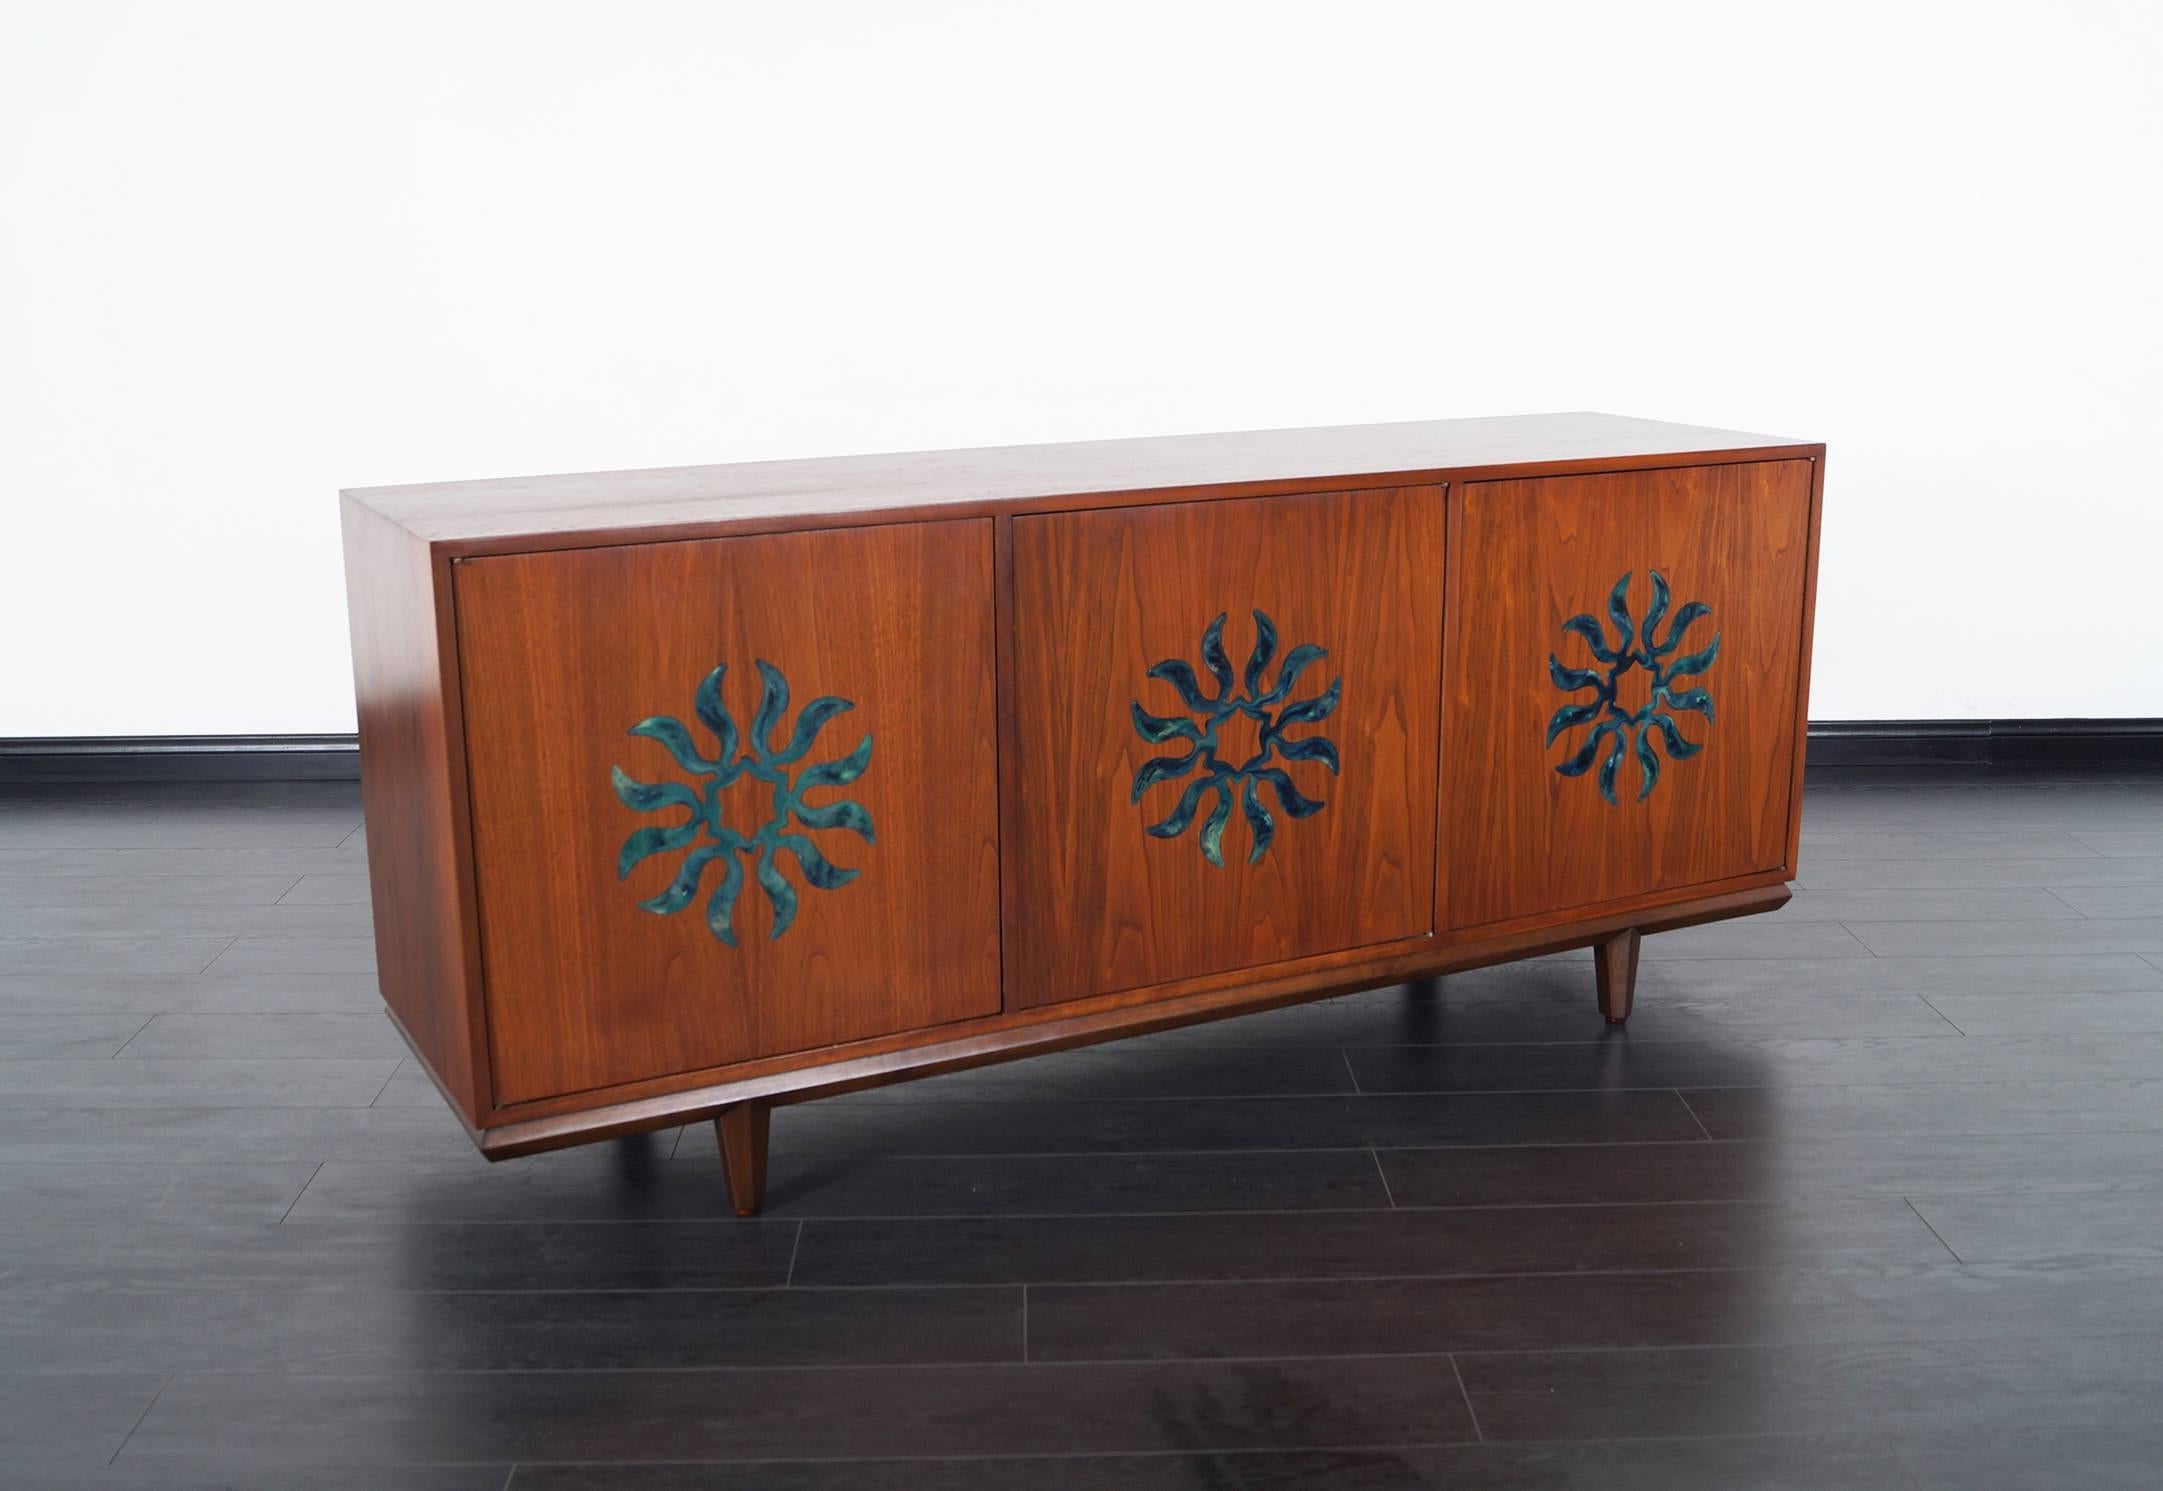 Vintage walnut credenza attributed to Monteverdi Young. This fabulous was produce by Cal Mode in South California. Features stunning starburst medallions on each door.